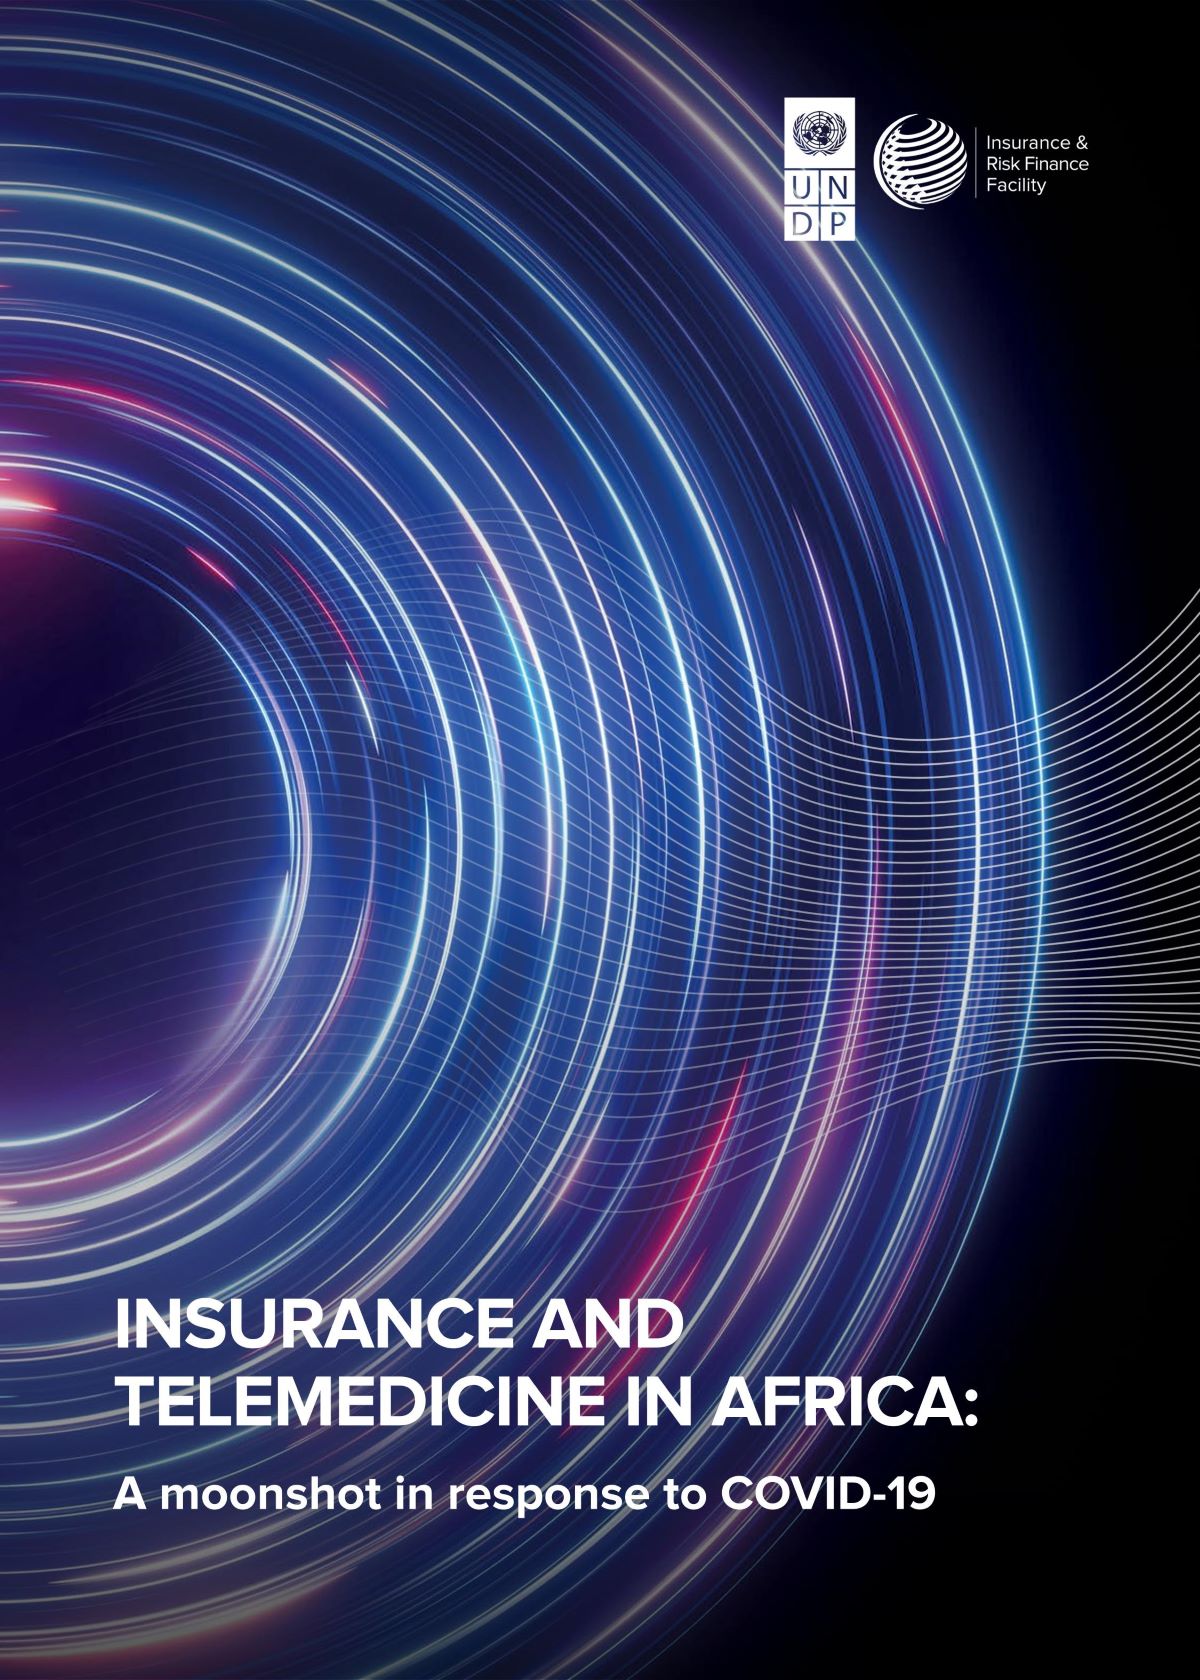 Insurance and telemedicine in Africa. A moonshot in response to Covid-19